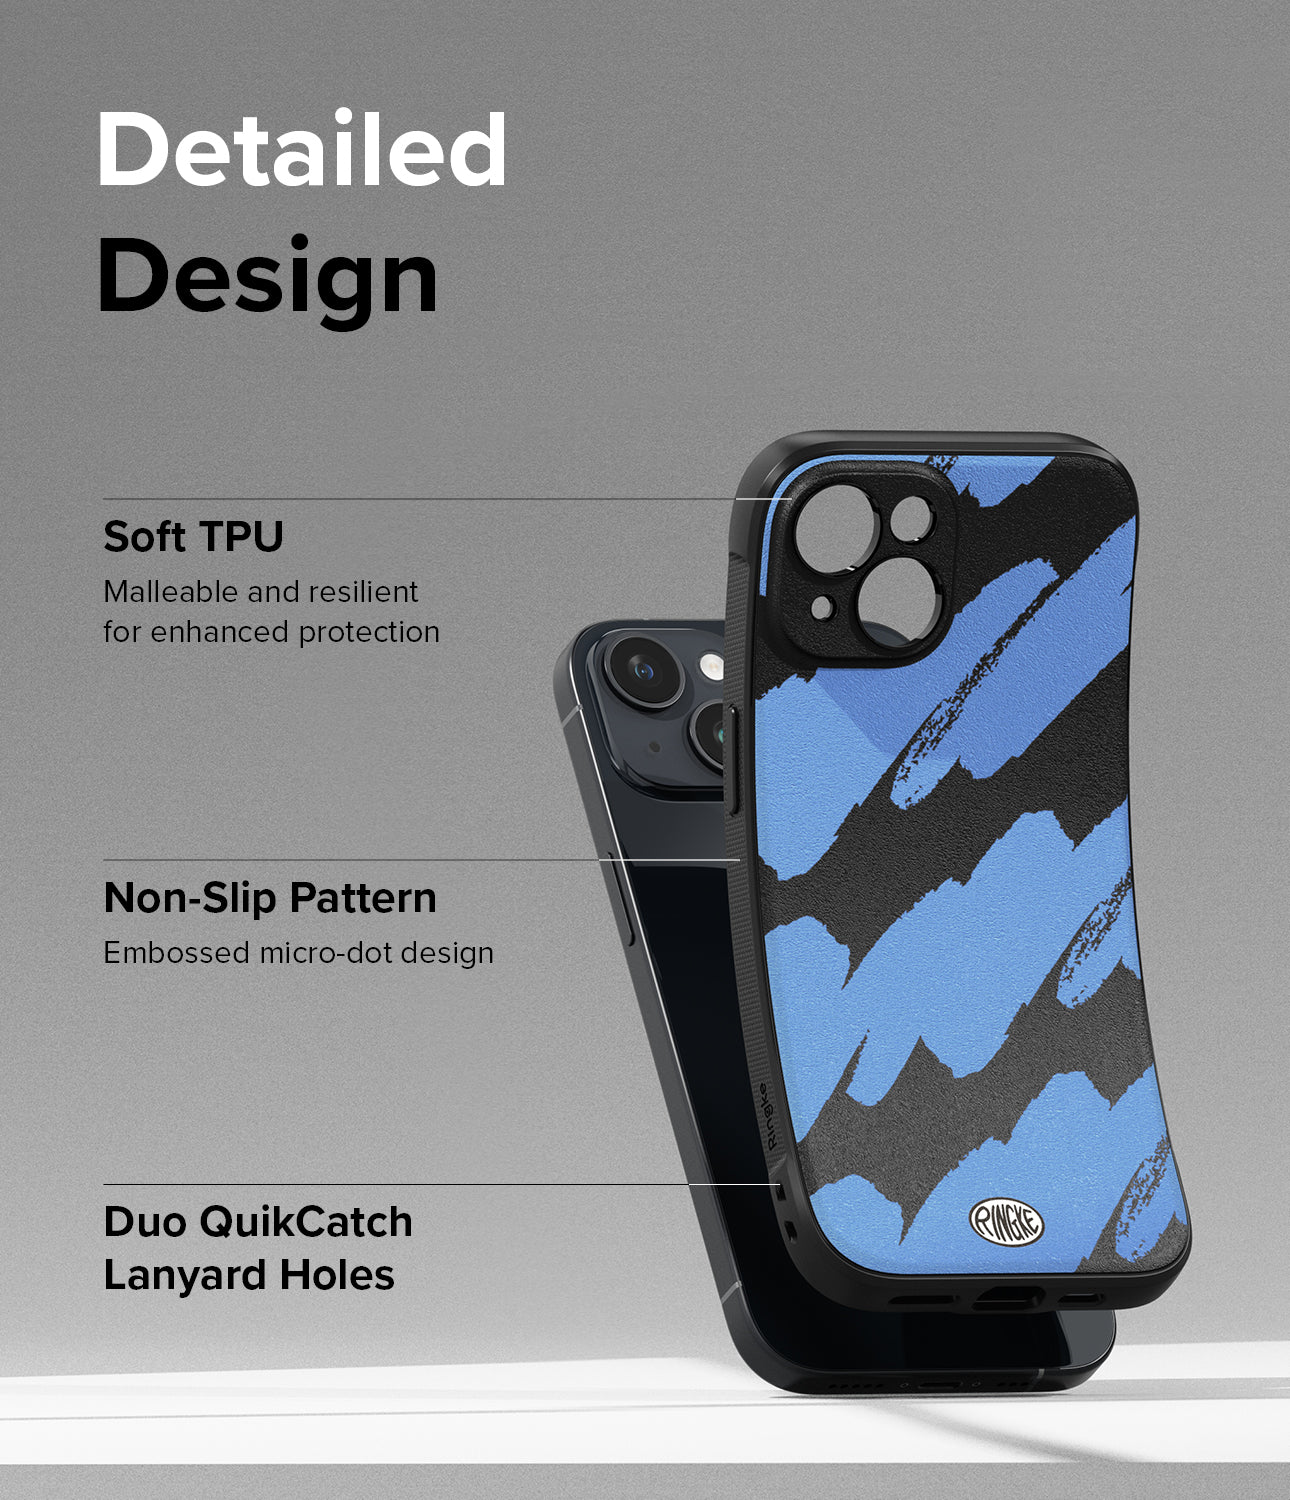 iPhone 15 Case | Onyx Design - Blue Brush - Detailed Design. Malleable and resilient for enhanced protection with Soft TPU. Embossed micro-dot design with Non-Slip Pattern. Duo QuikCatch Lanyard Holes